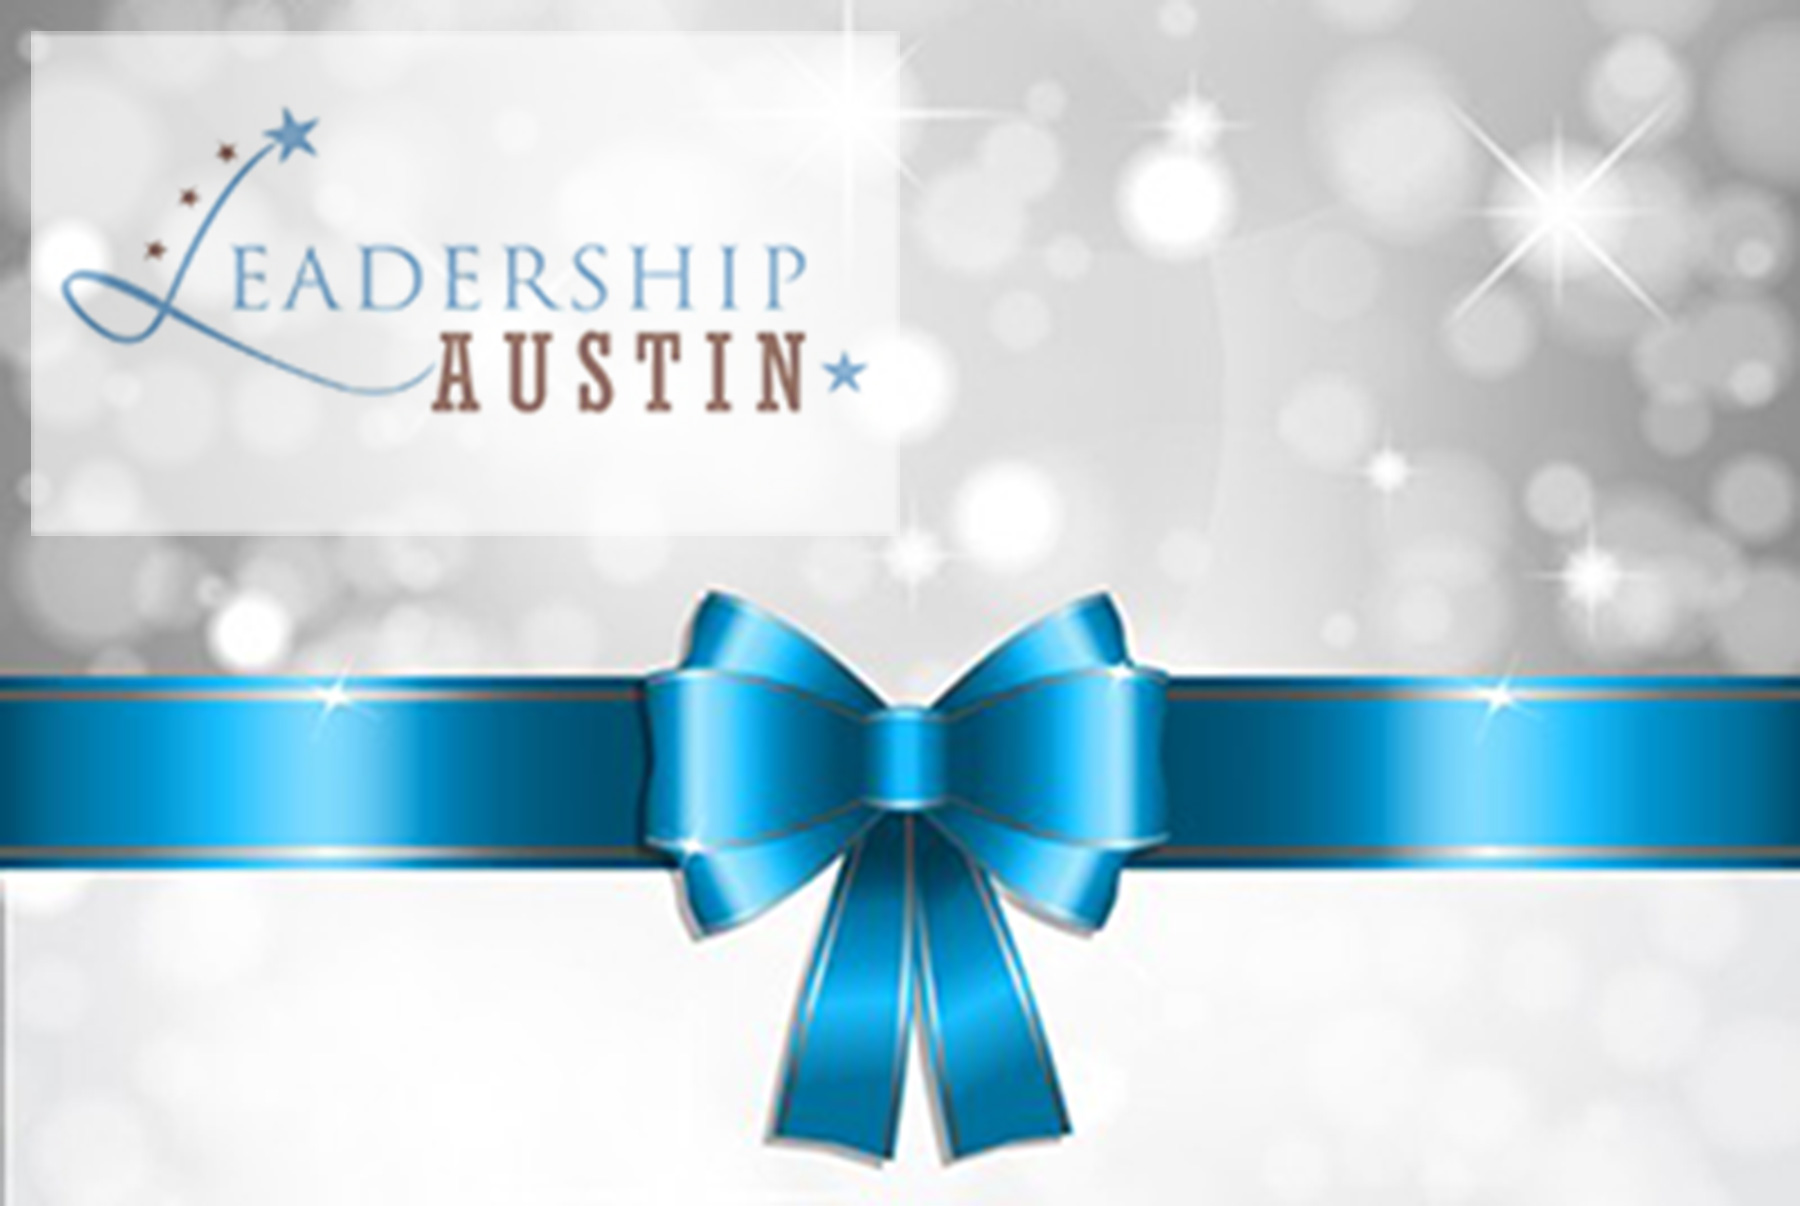 Ring in the Holidays with Leadership Austin